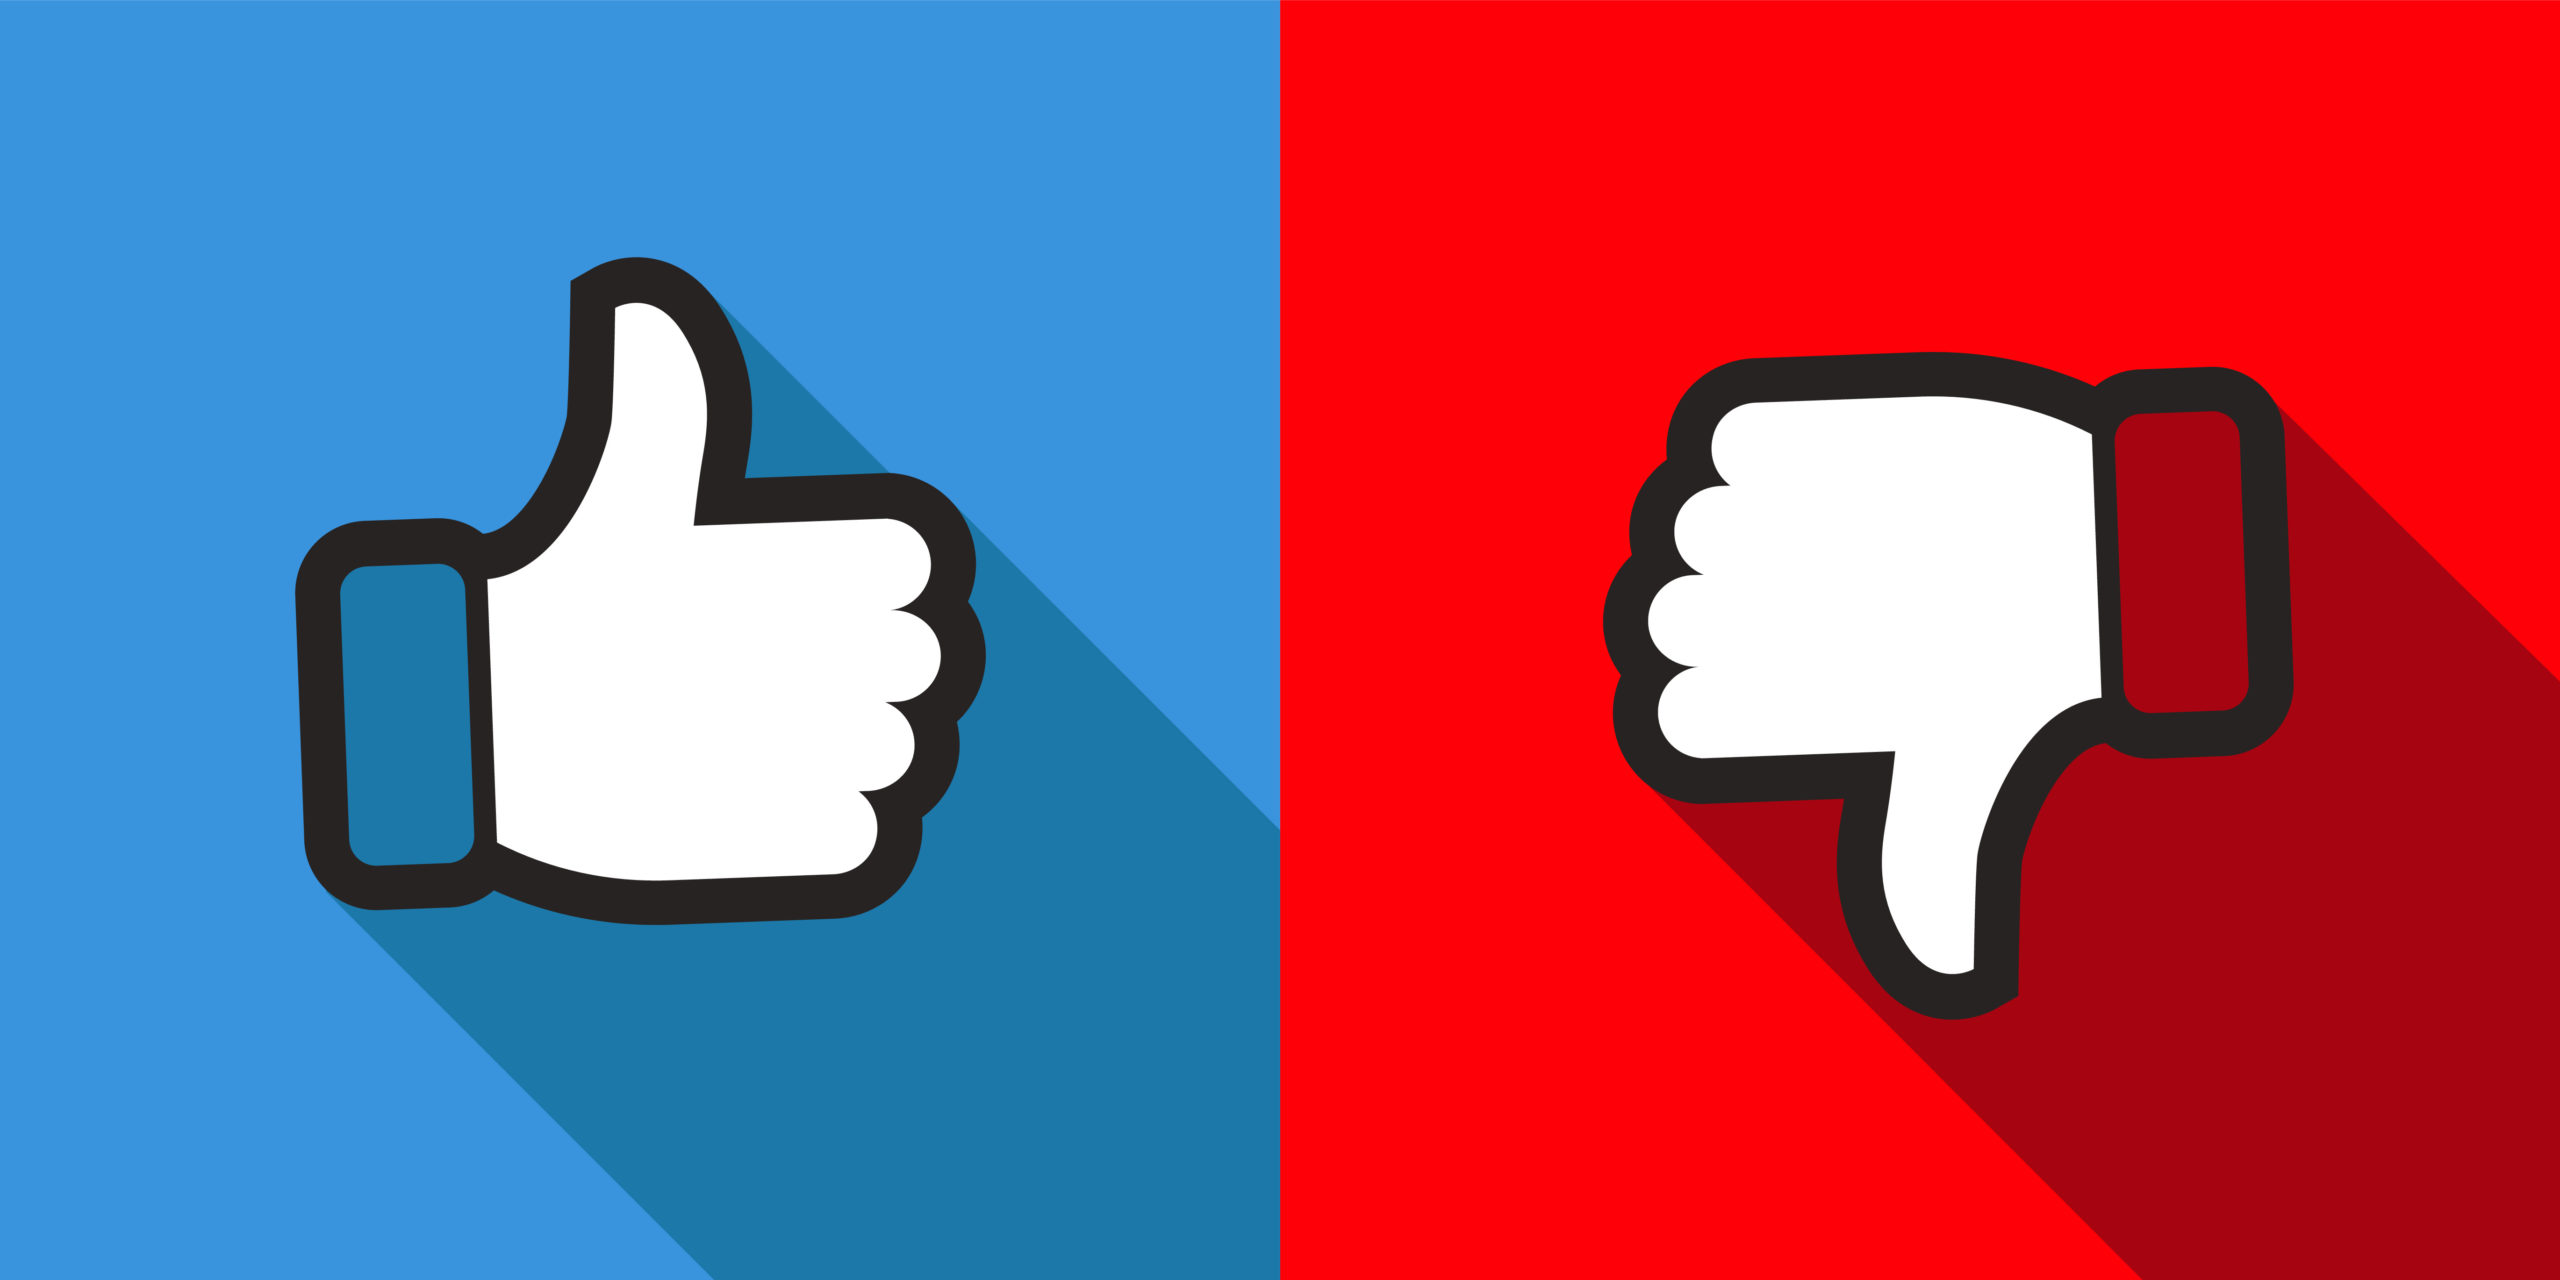 Thumb up and down red and green icons. Vector illustration. I li